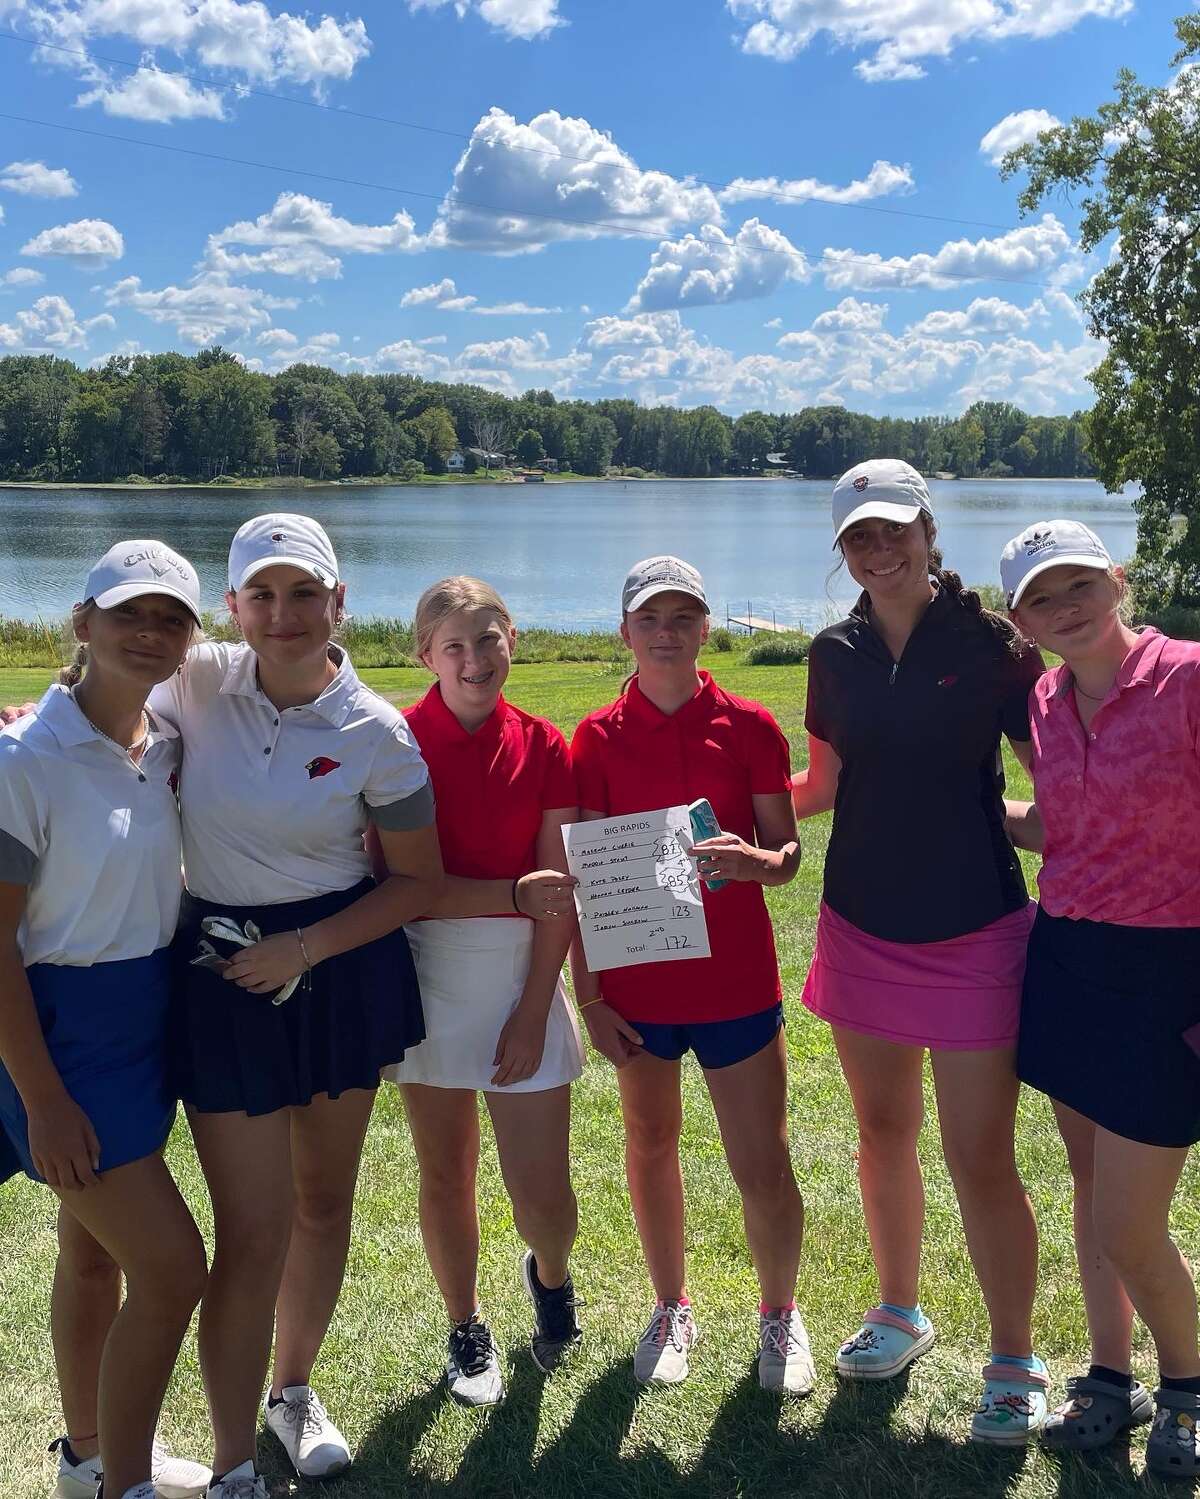 The Big Rapids girls golf team took second place at the Chippewa Hills scramble on Wednesday: (from left) Makenna Currie, Maddie Stout, Paisley Hallman, Jaydn Suckow, Kate Posey and Hannah Leyder.